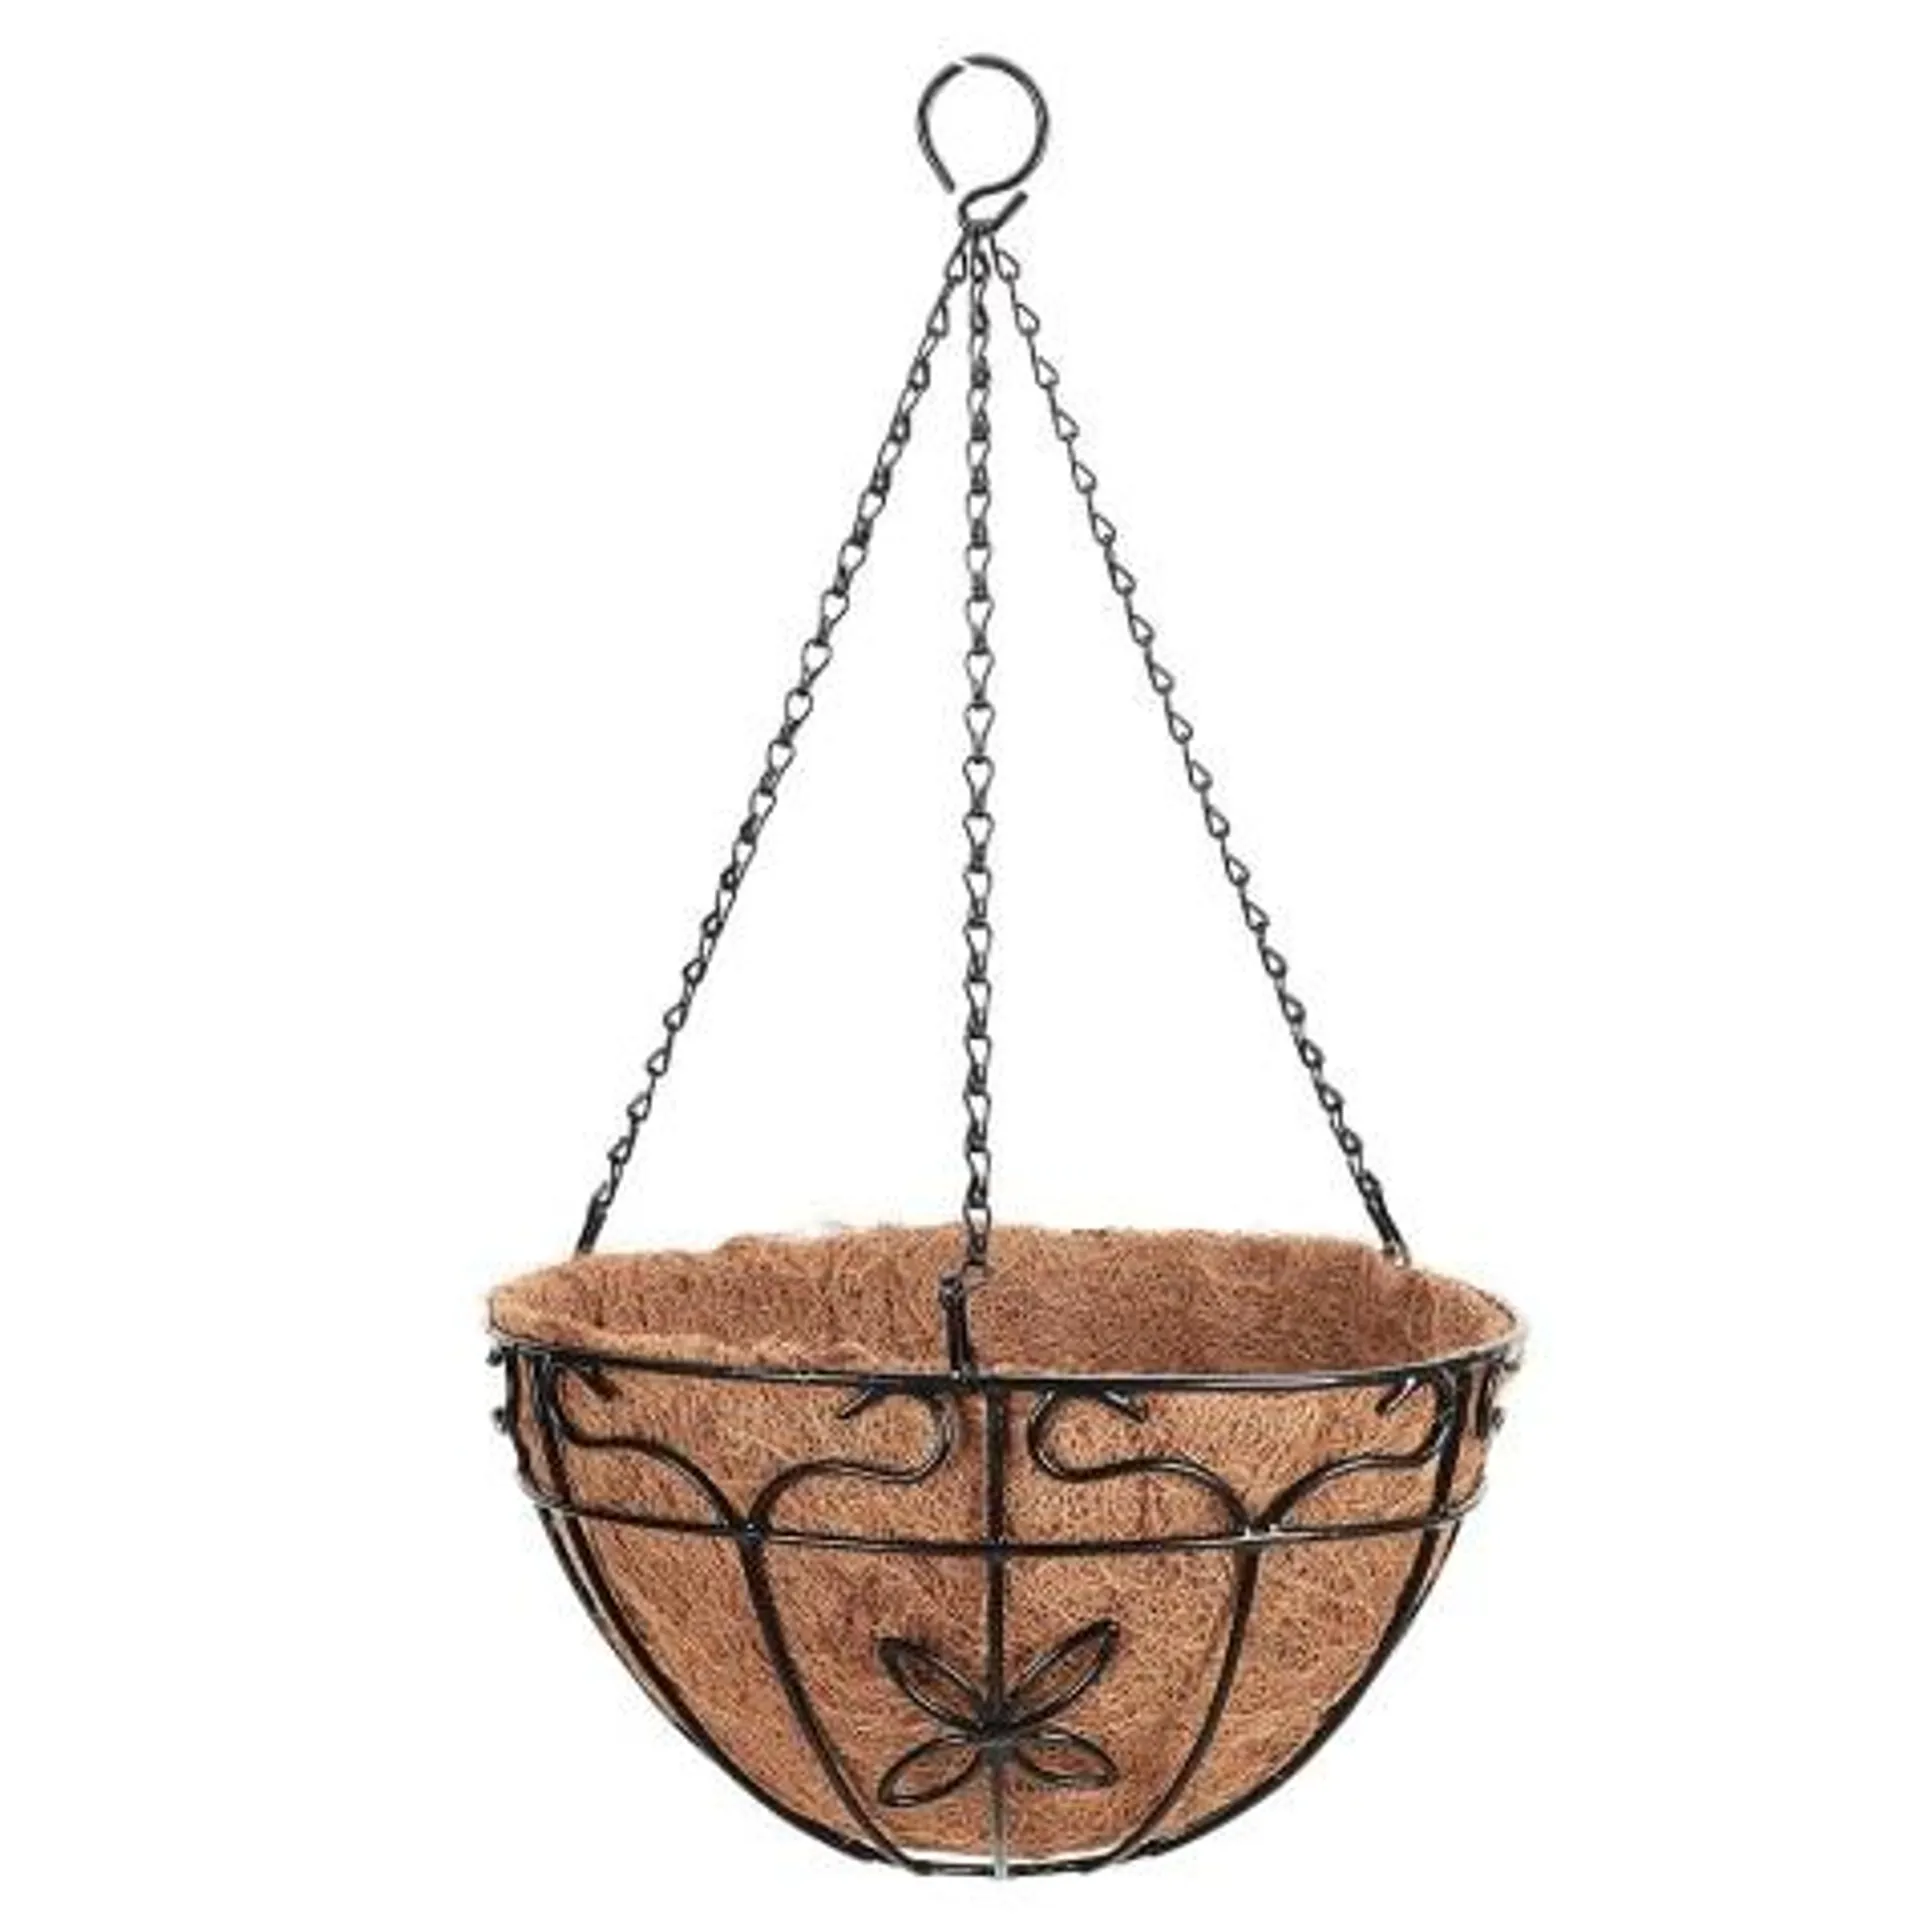 Decorative Flower Hanging Wire Basket Planter with Coco Liner, 14"